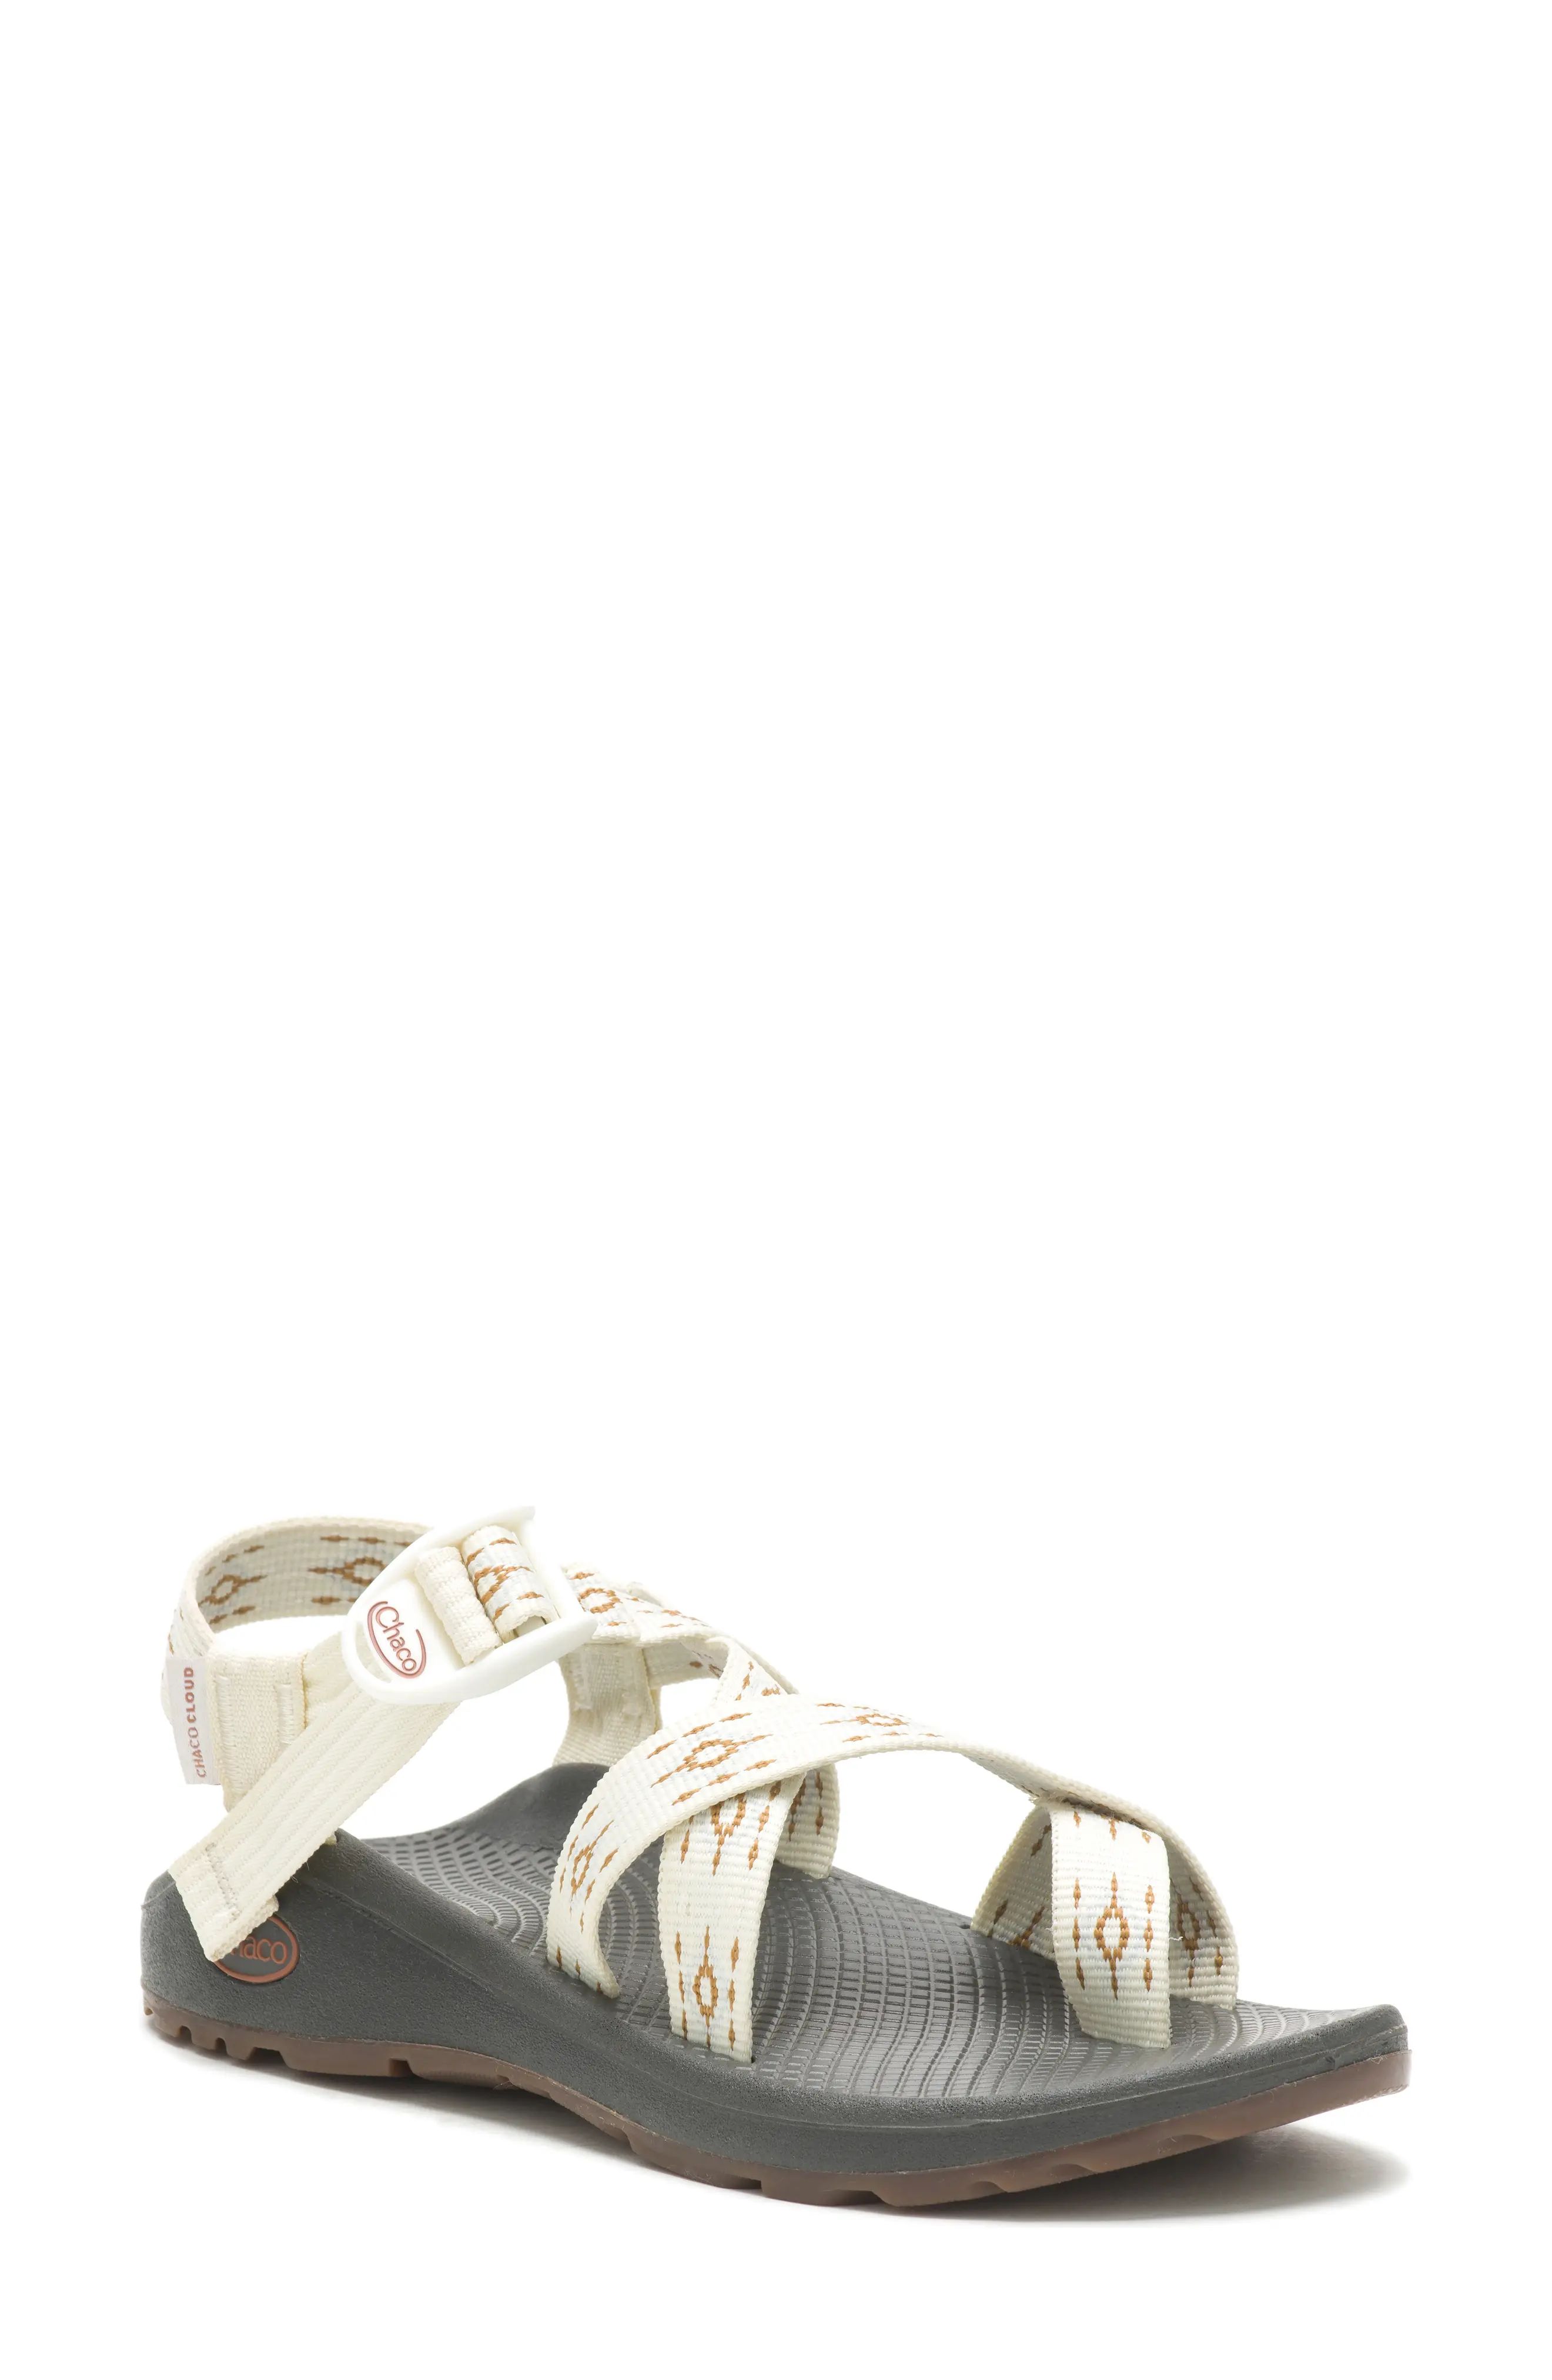 Chaco Z/Cloud 2 Sport Sandal in Oculi Sand at Nordstrom, Size 10 | Nordstrom